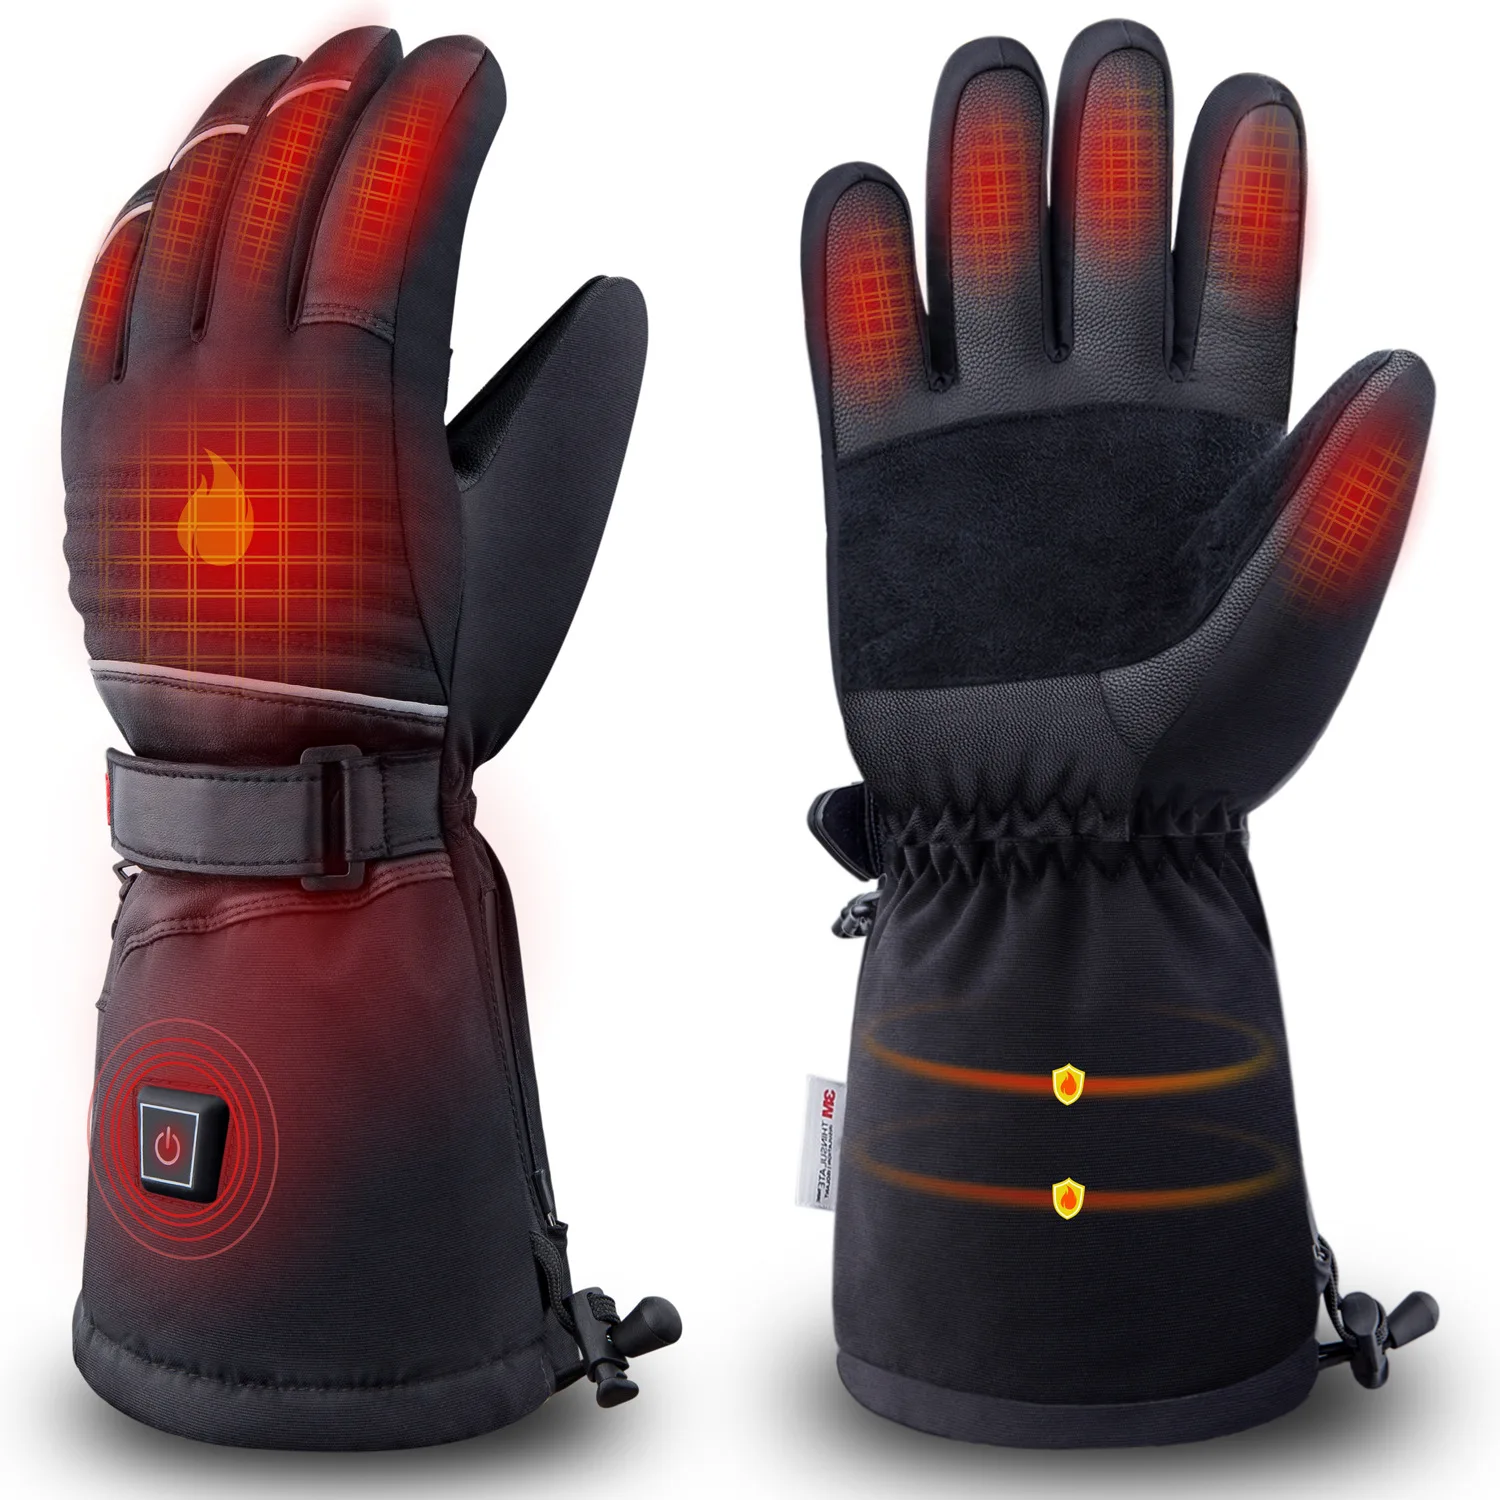 Winter outdoor hiking camping hiking motorcycle riding three-speed thermostat charging waterproof ski heating gloves